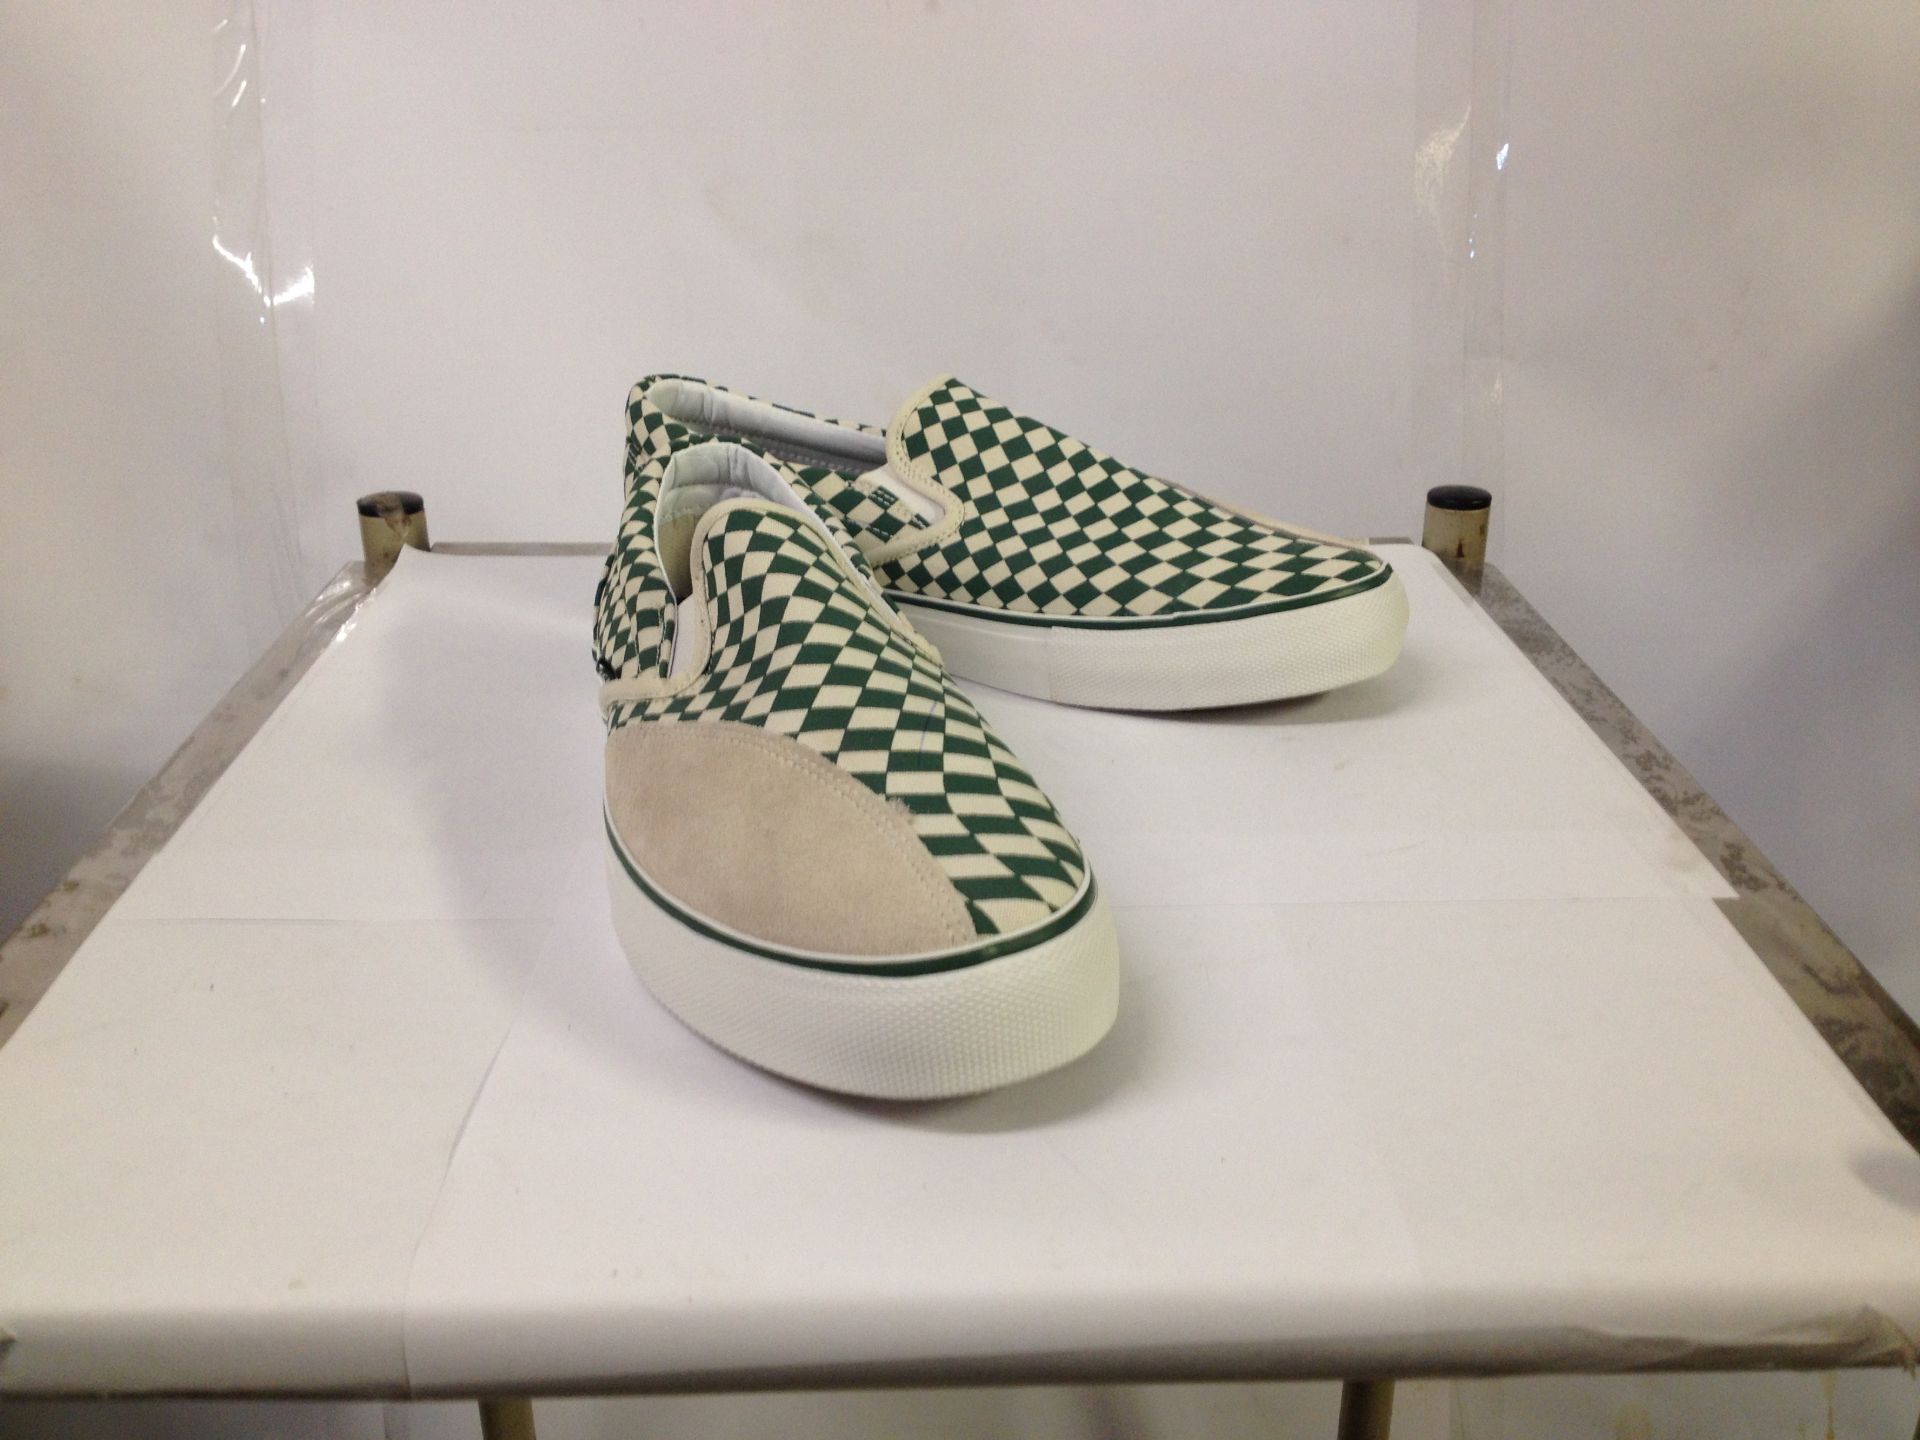 1 x Dodds Skate Shoe | Colour: Green Check Trip | UK Size: 8 | Unisex | RRP £ 55 - Image 2 of 2